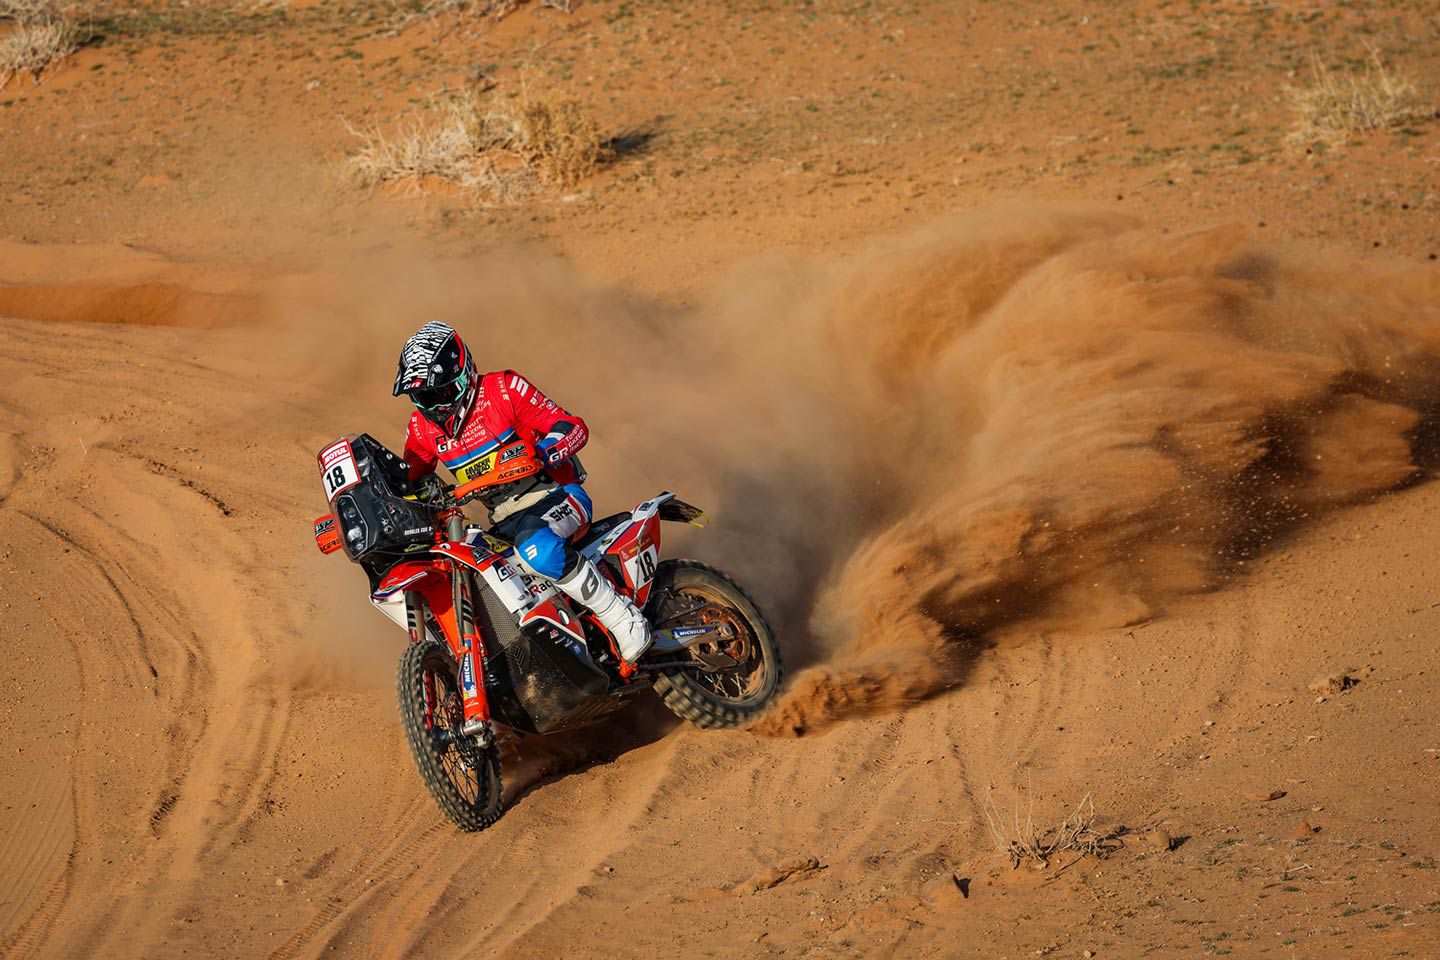 Bradley Cox (18), of the BAS World KTM Racing team, does some drifting in the desert.